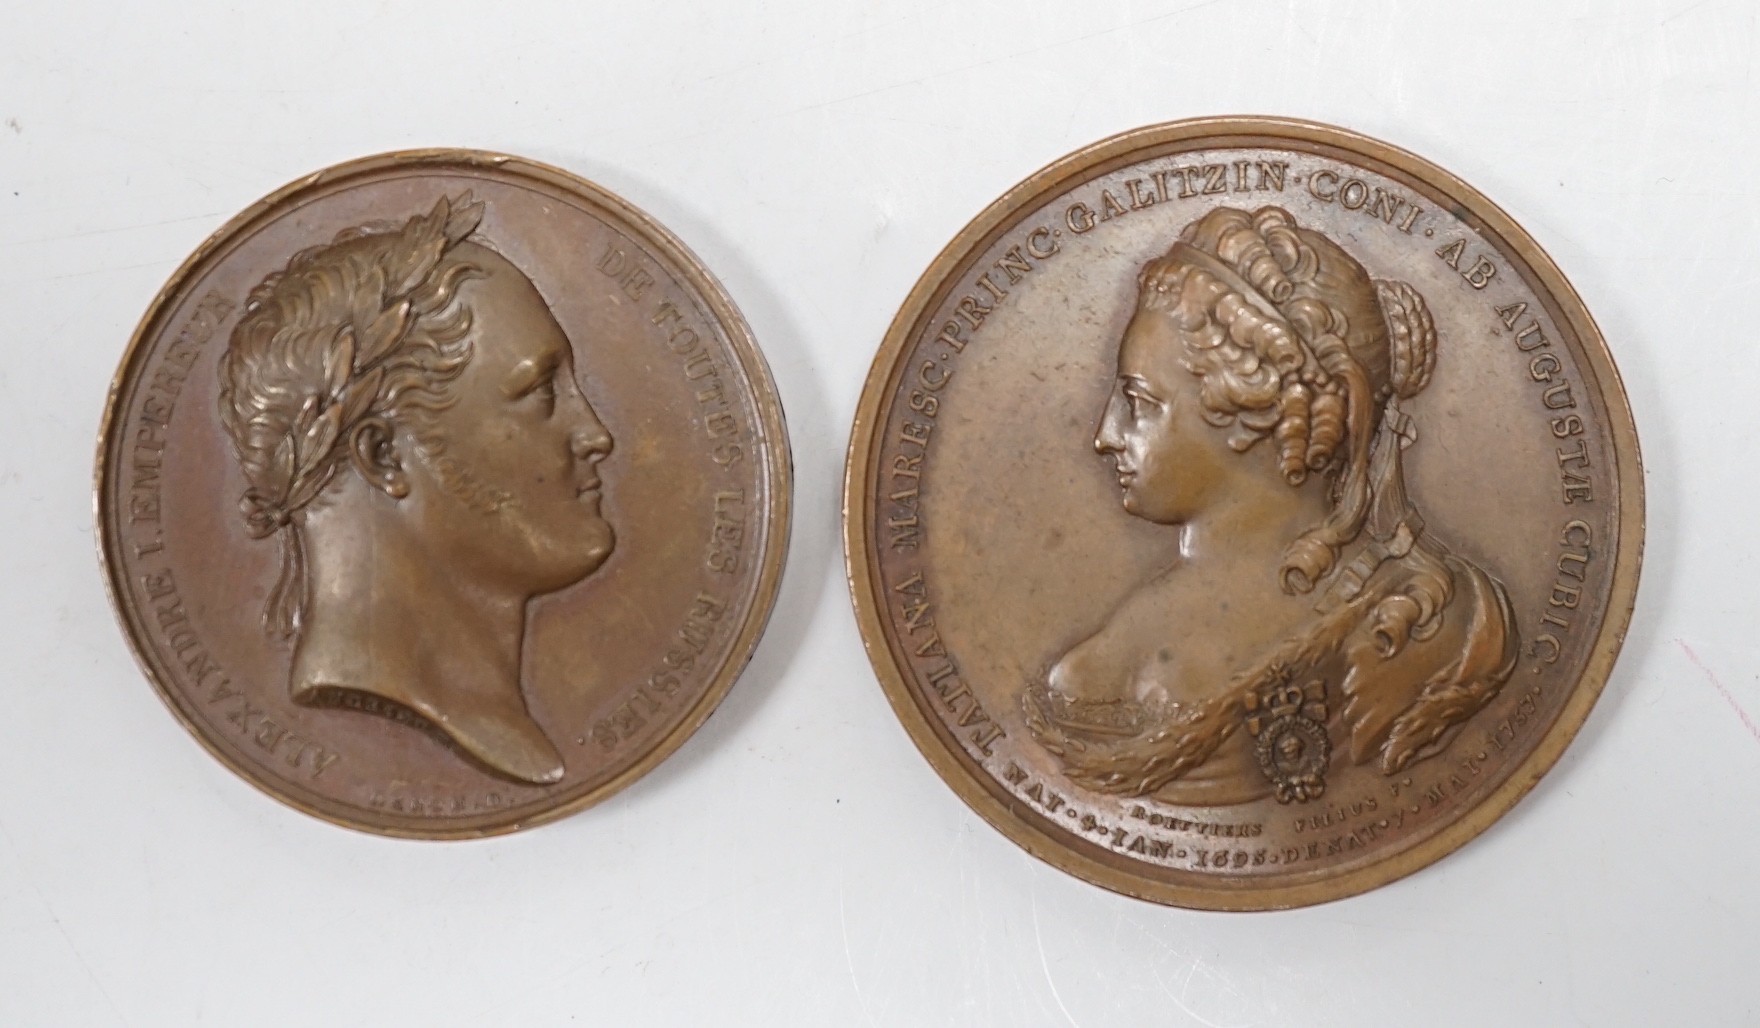 Two 18th/19th century Russia commemorative medals – a Death of Princess Tatiano Galitsyn copper medal 1757 and an Alexander I Visit to Paris bronze medal 1814